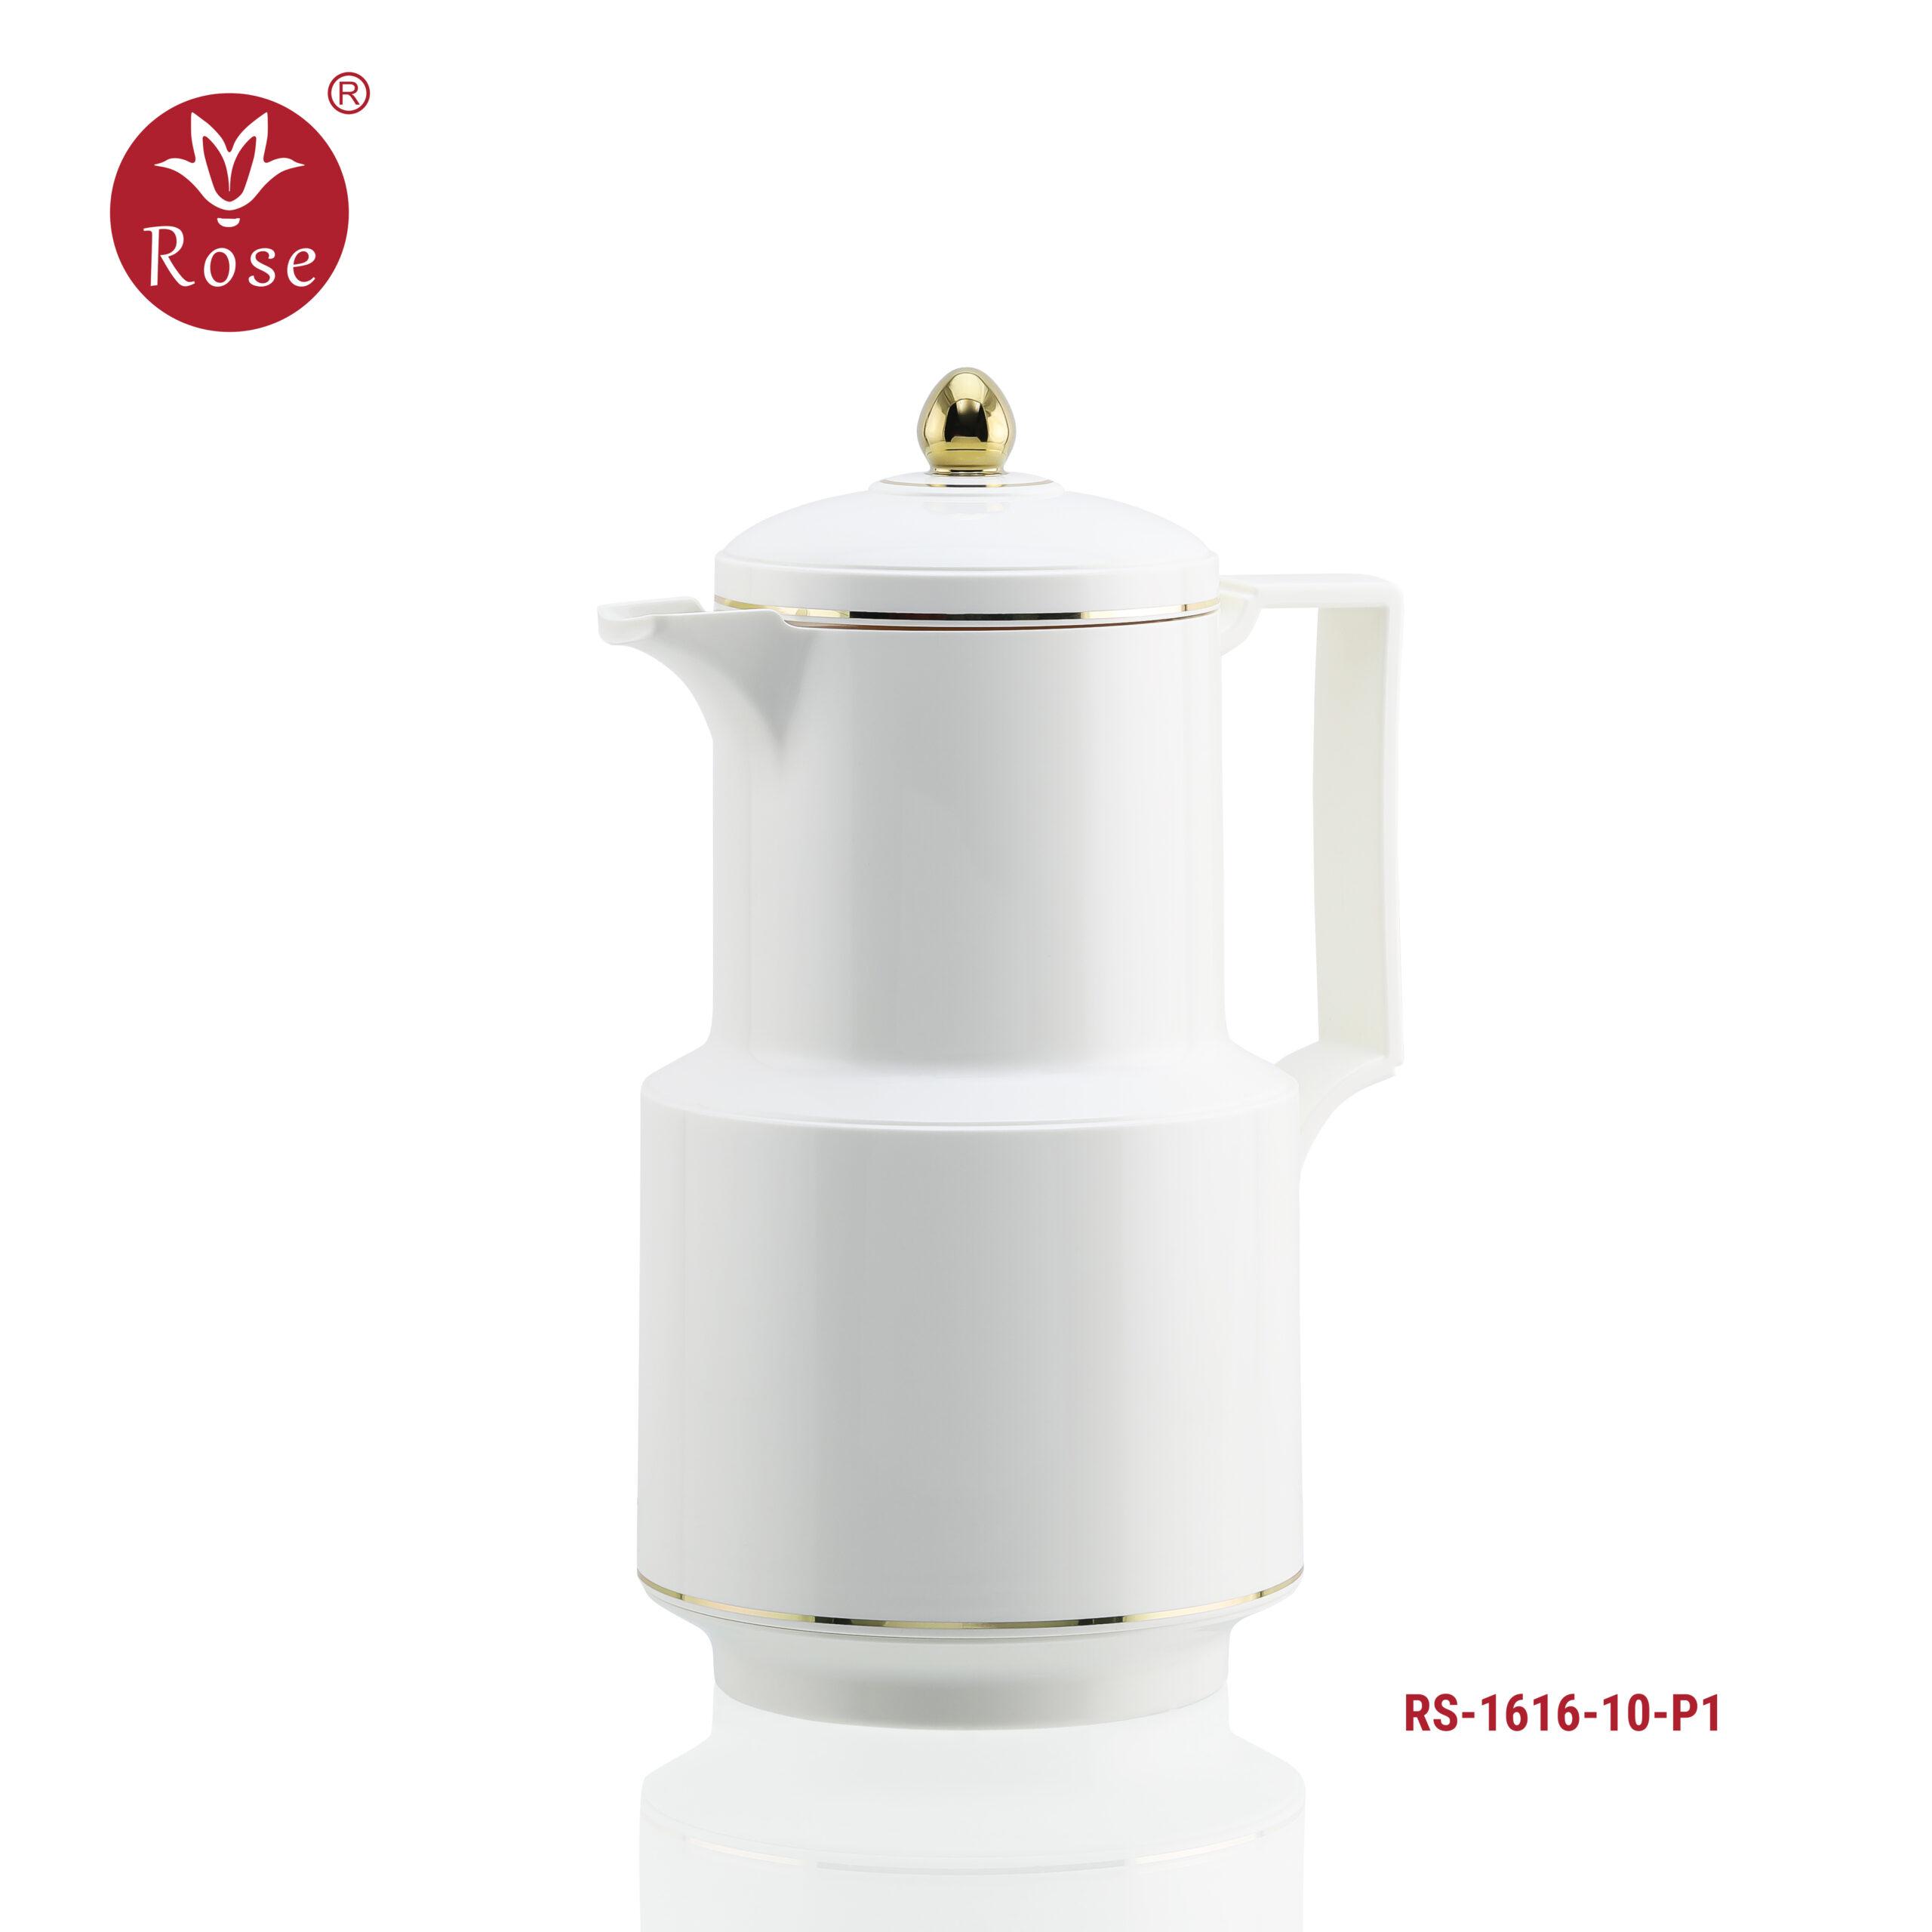 Rose Pearl White Vacuum Flask 1.0 Liter RS-1616 White